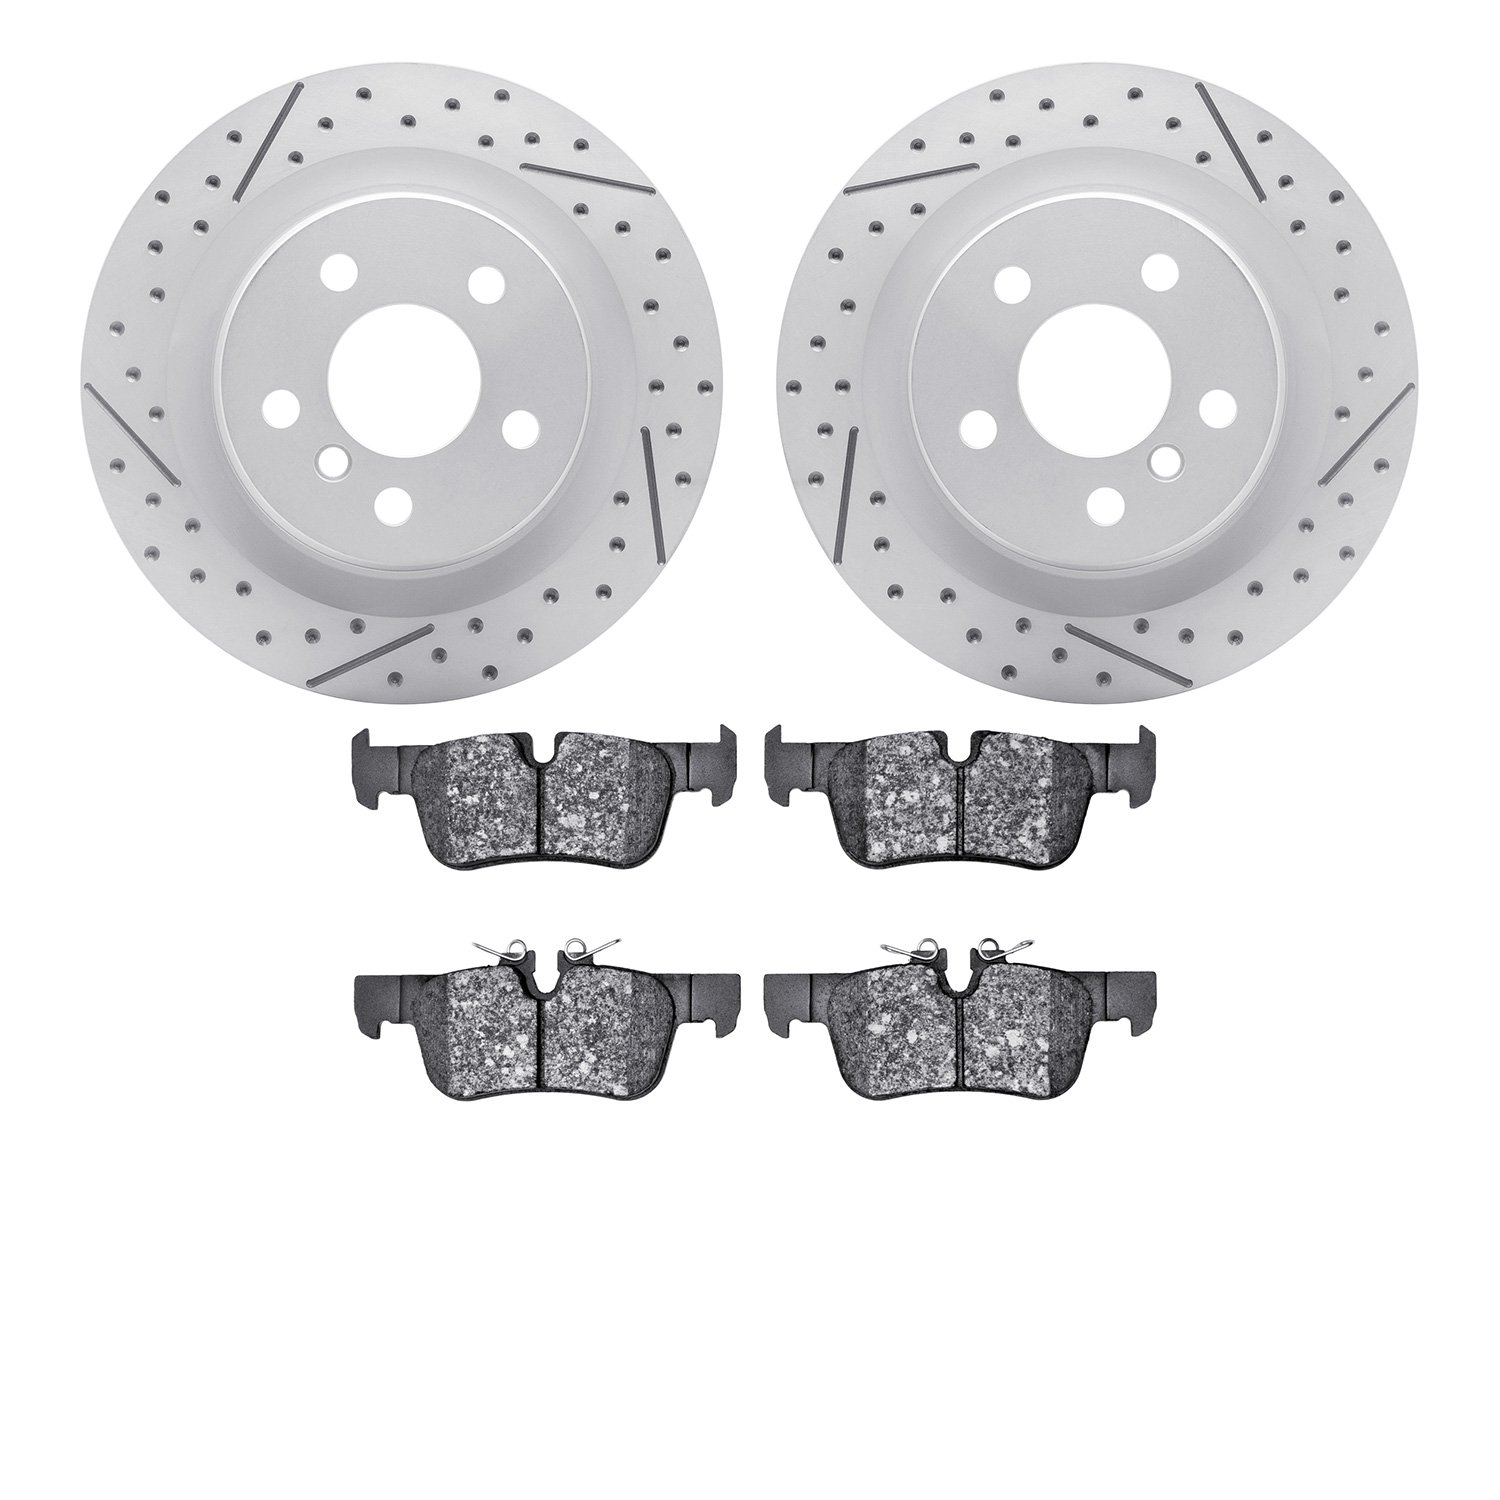 2502-31138 Geoperformance Drilled/Slotted Rotors w/5000 Advanced Brake Pads Kit, Fits Select Multiple Makes/Models, Position: Re